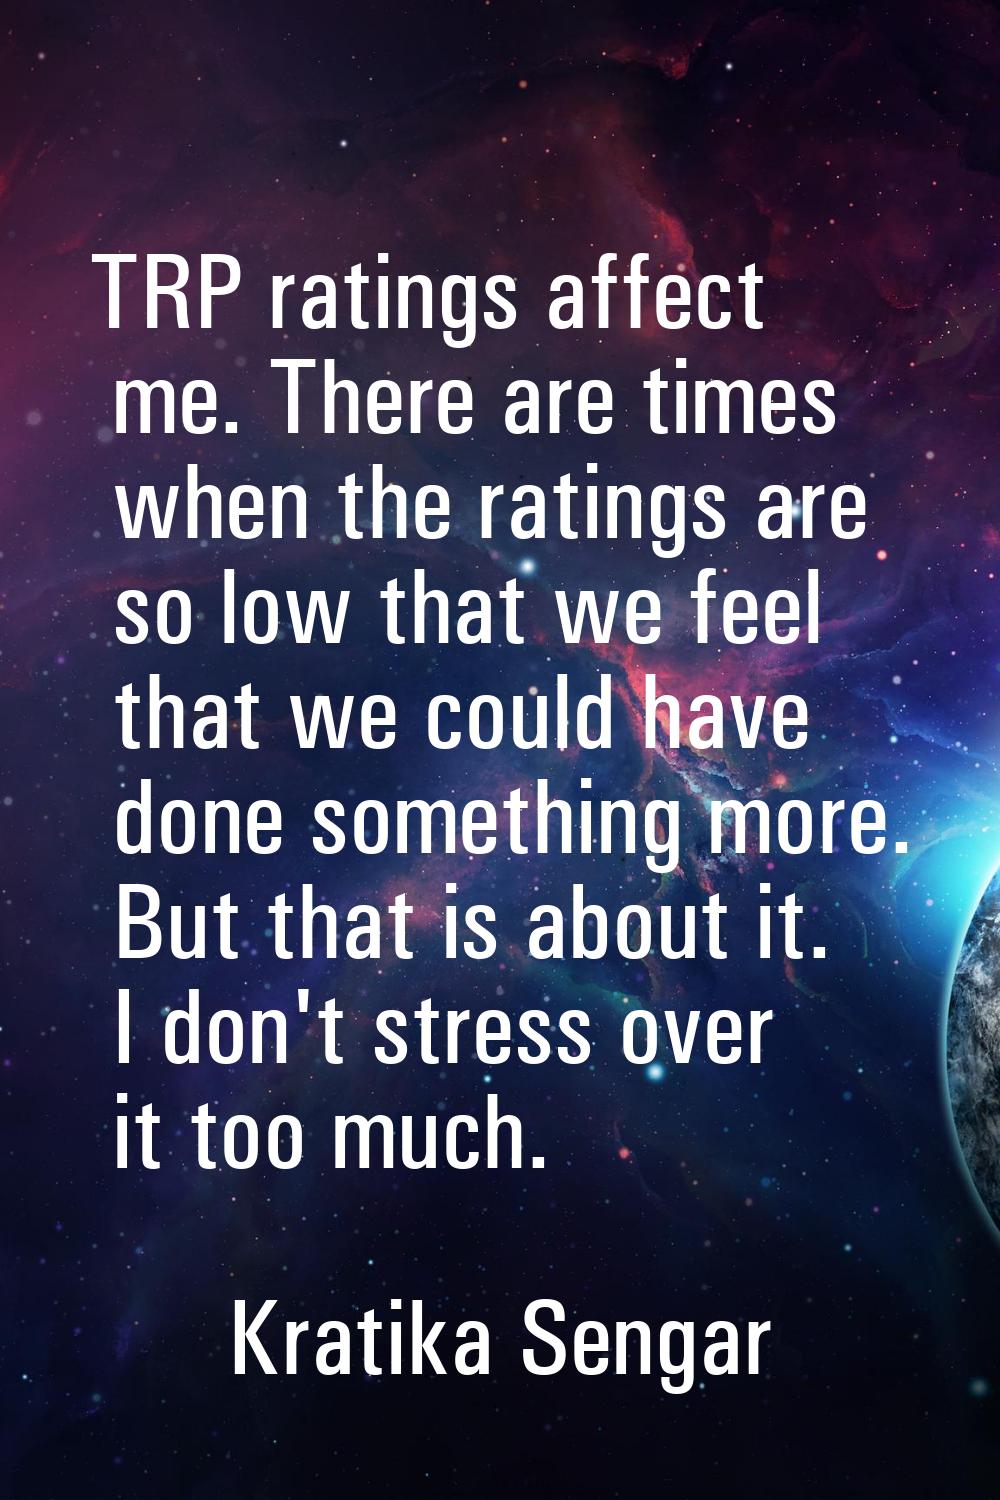 TRP ratings affect me. There are times when the ratings are so low that we feel that we could have 